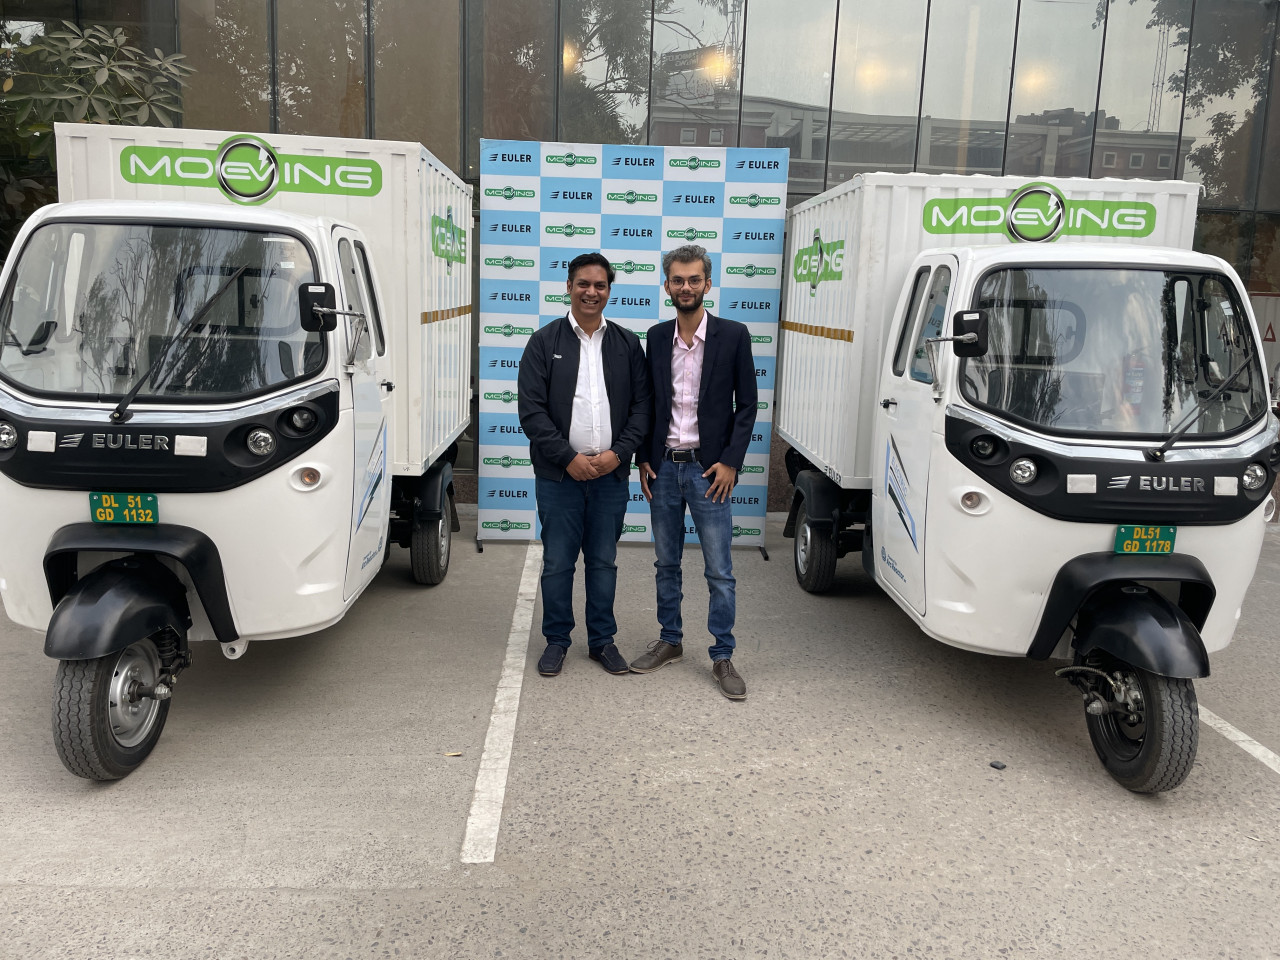 Vikas Mishra, Founder, and CEO - MoEVing standing with Saurav Kumar, Founder and CEO - Euler Motors.